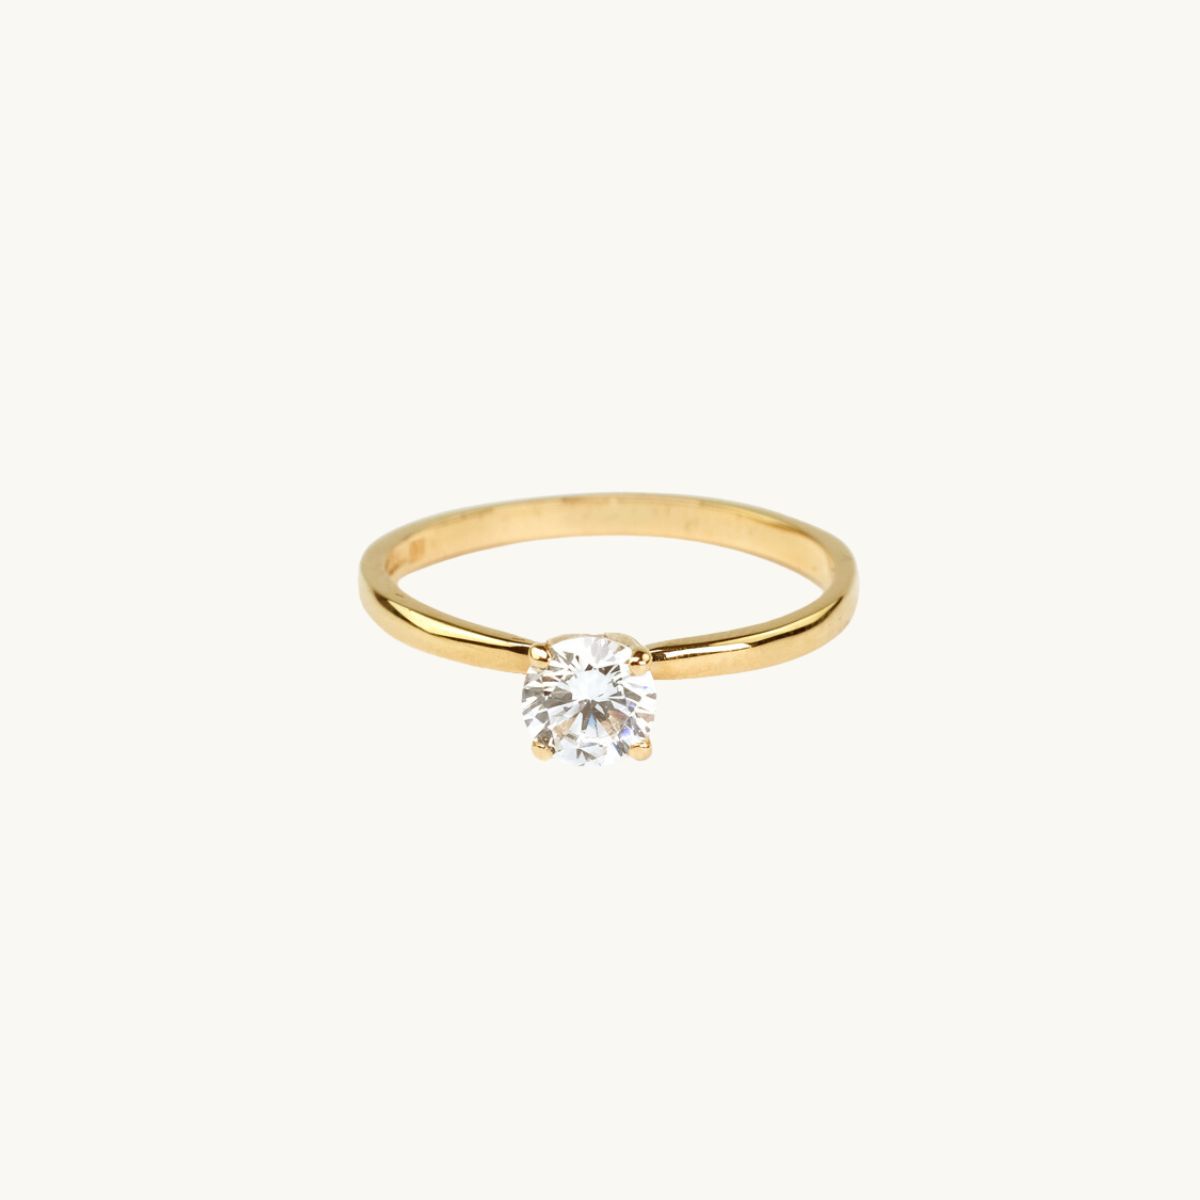 8K gold ring with white cz stone